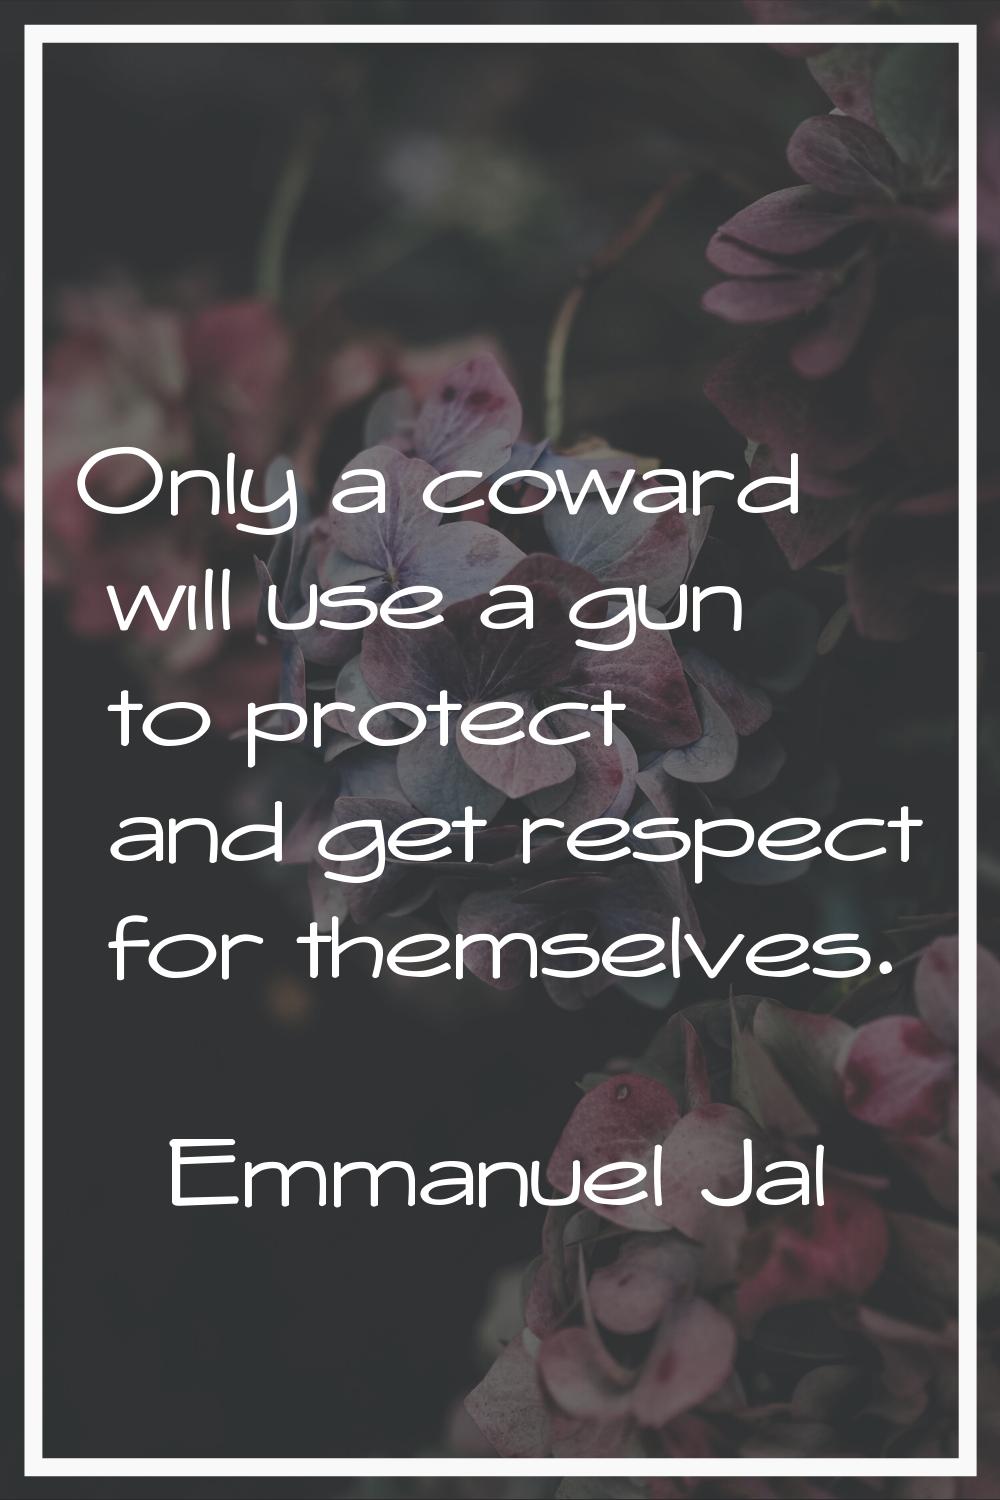 Only a coward will use a gun to protect and get respect for themselves.